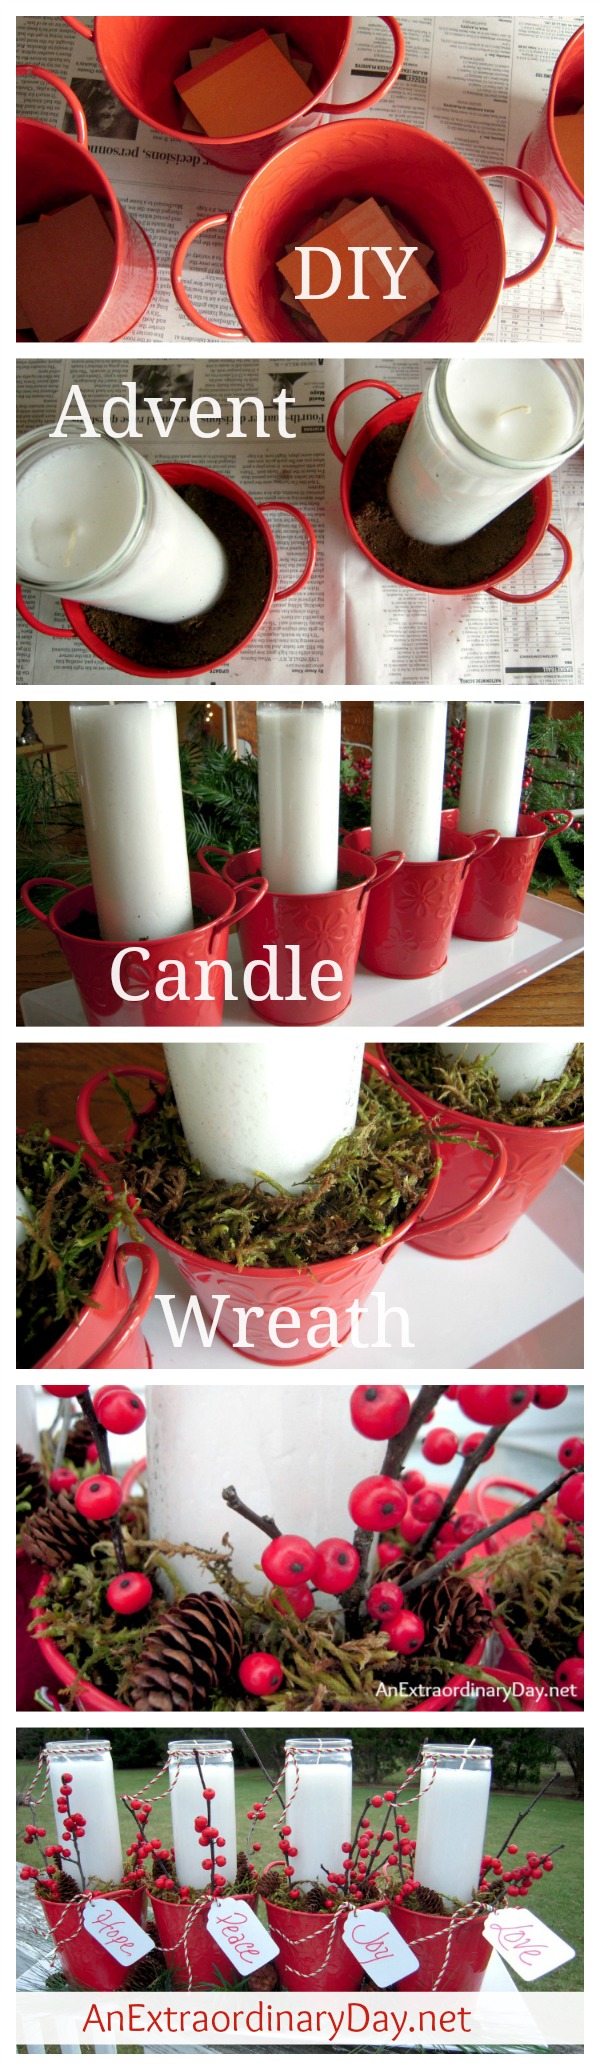 Tutorial :: Not Your Typical DIY Advent Candle Wreath :: AnExtraordinaryDay.net